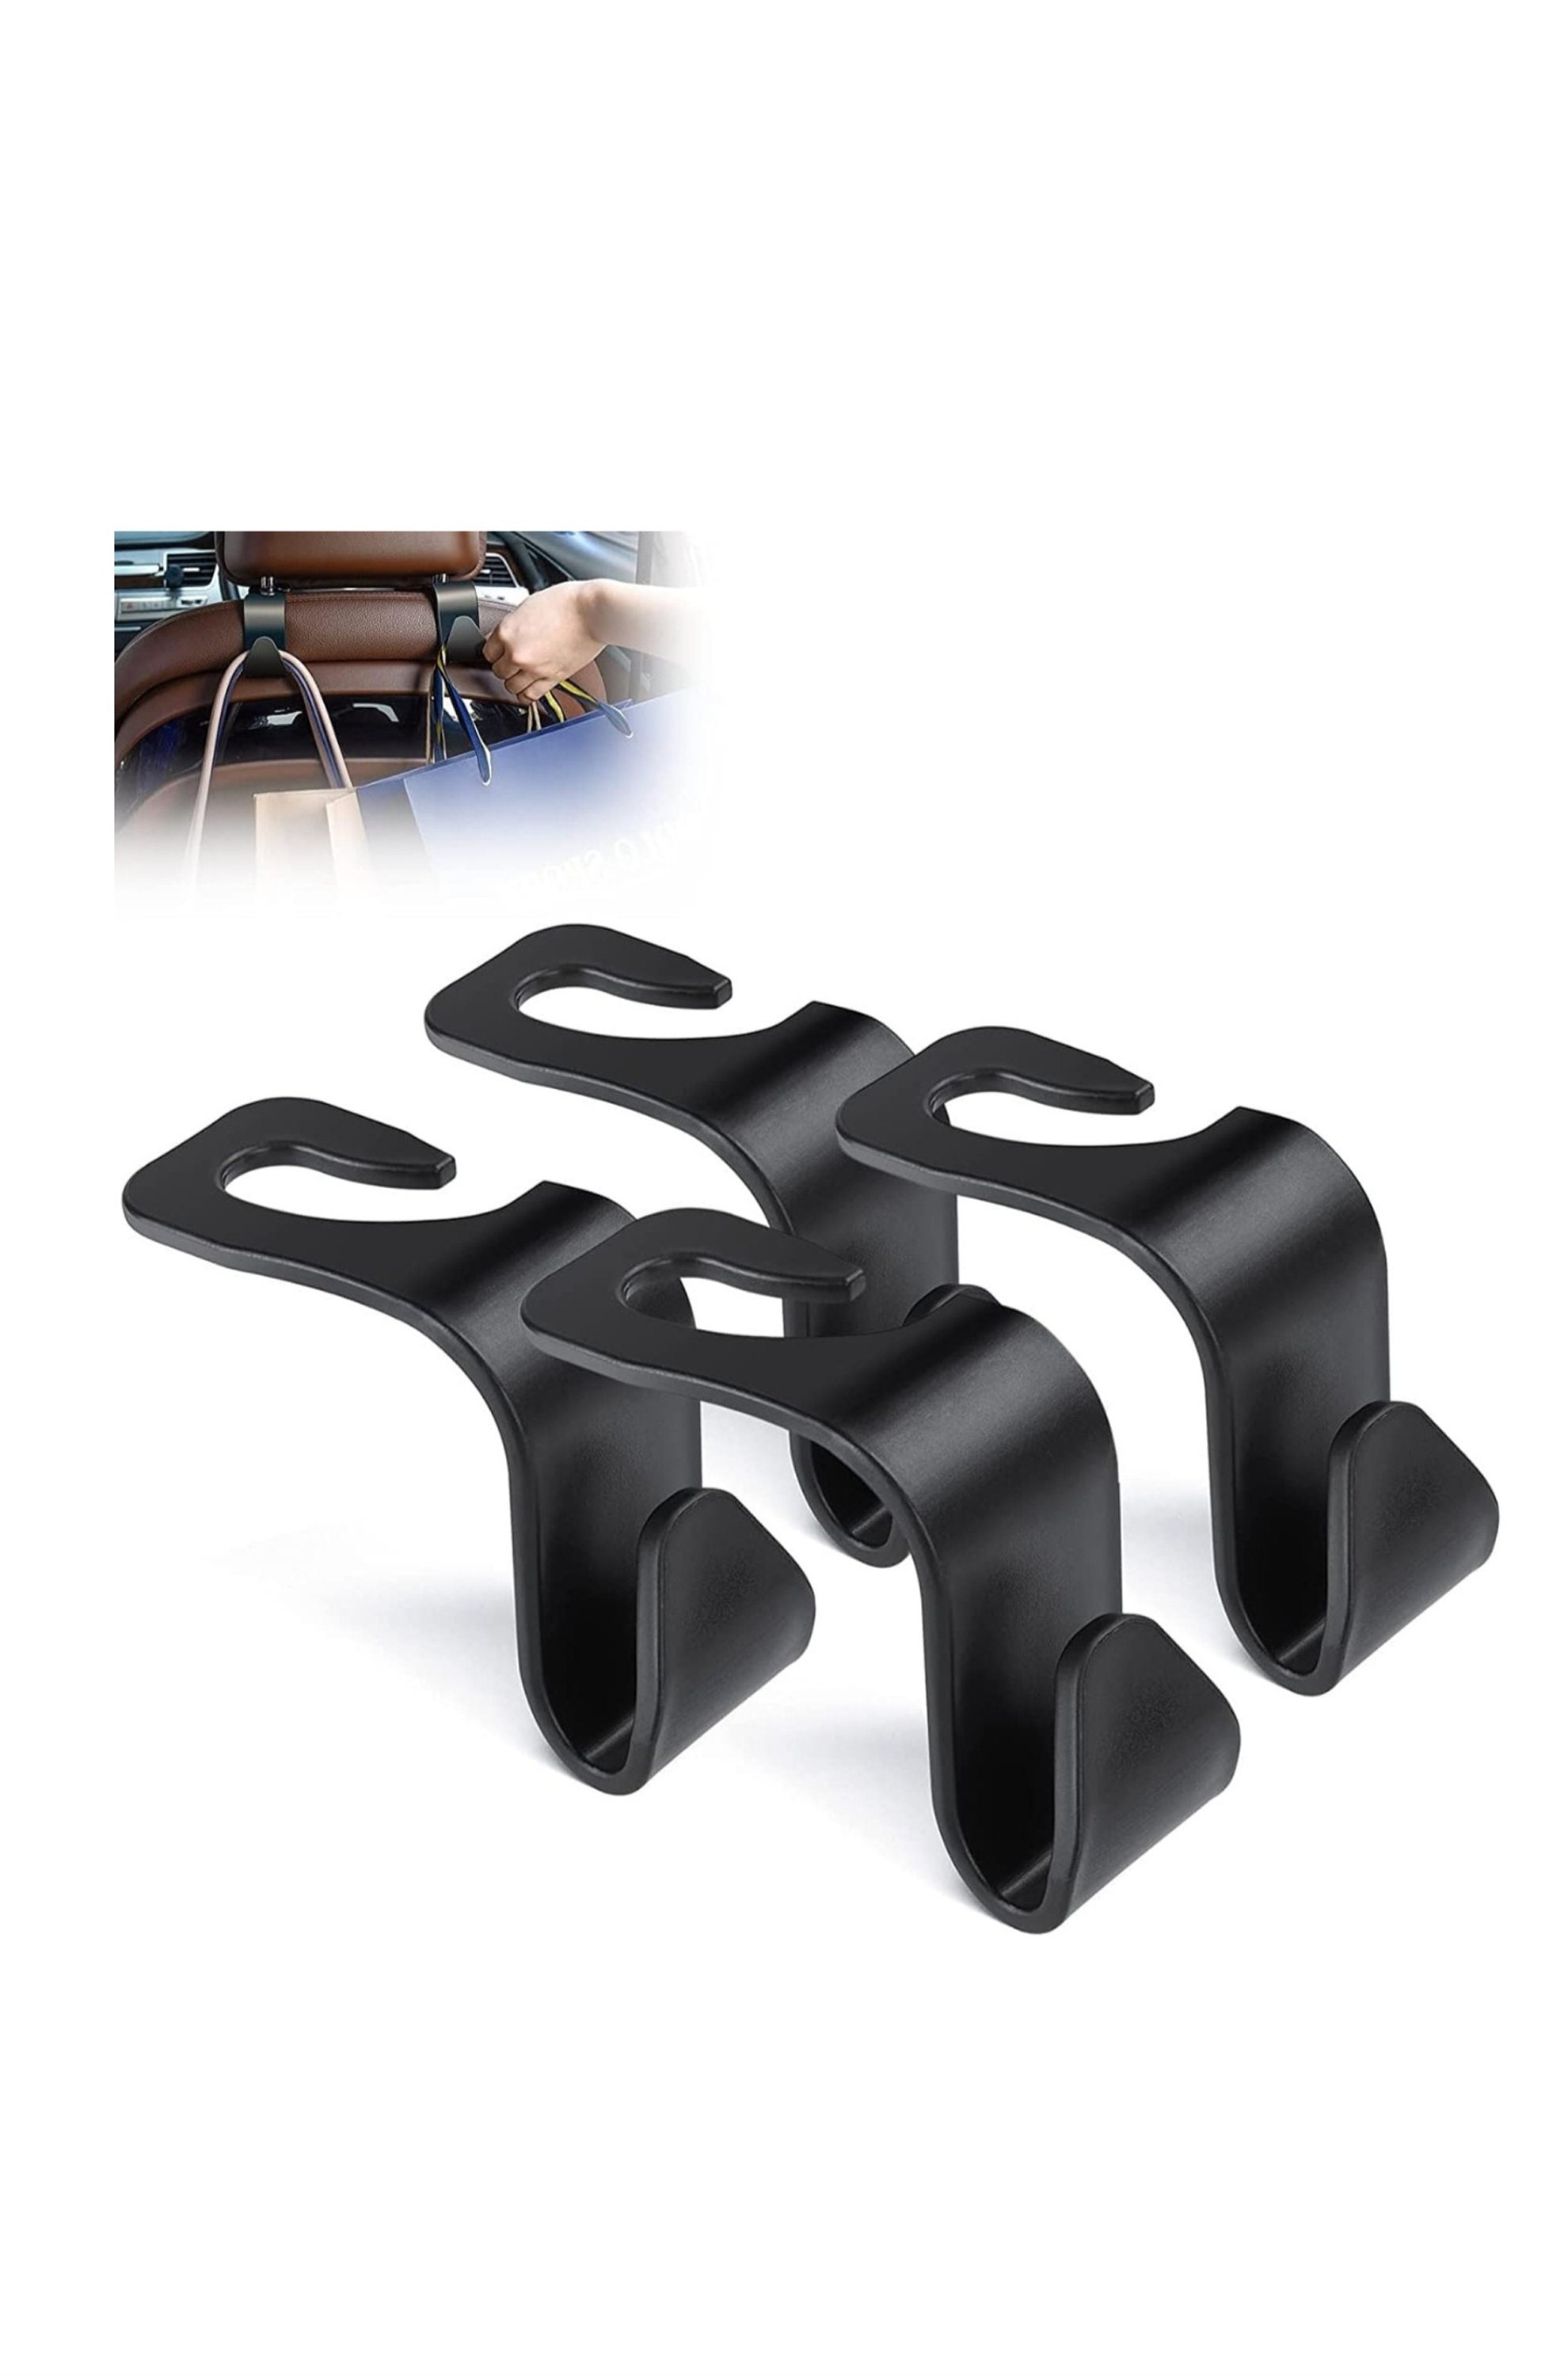 Universal Car Seat Back Page Hook With Phone Holder Set Of 2 For Headrest  Storage And Auto Accessories From M2xn, $22.39